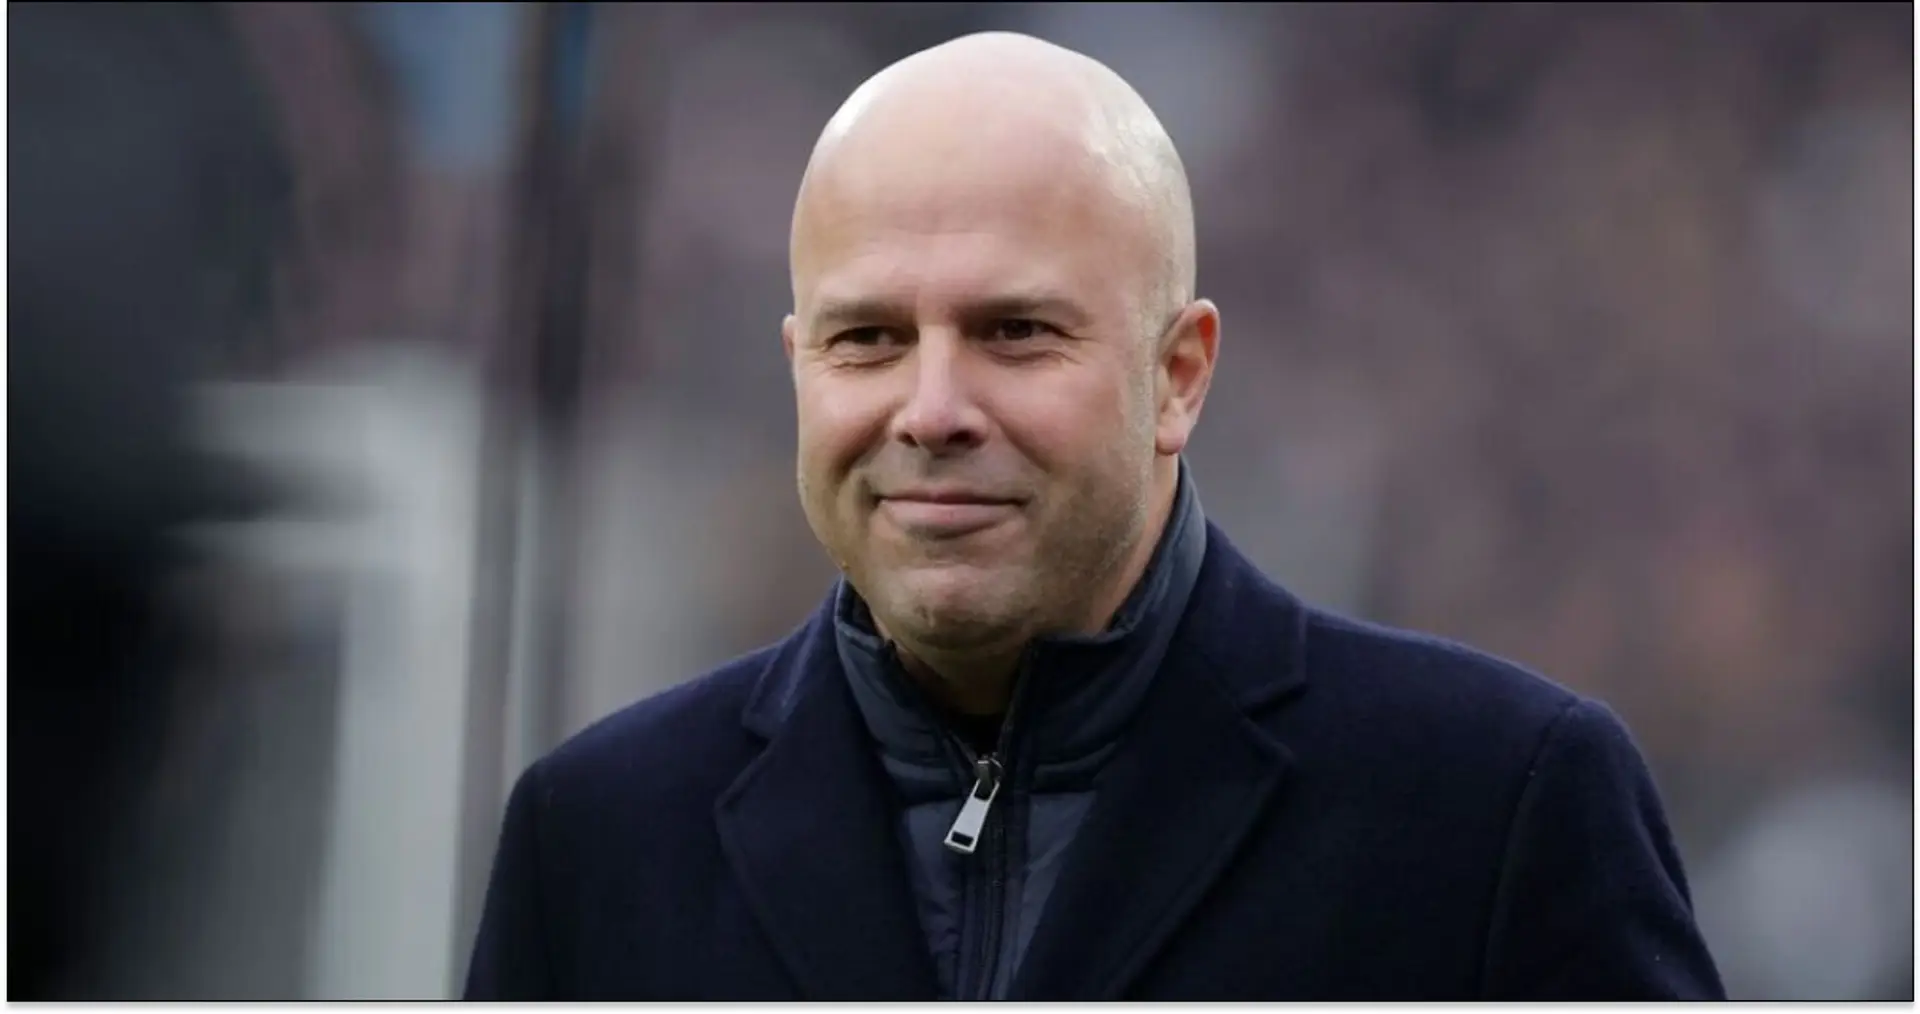 Feyenoord's Arne Slot leads race for Liverpool manager job — multiple sources